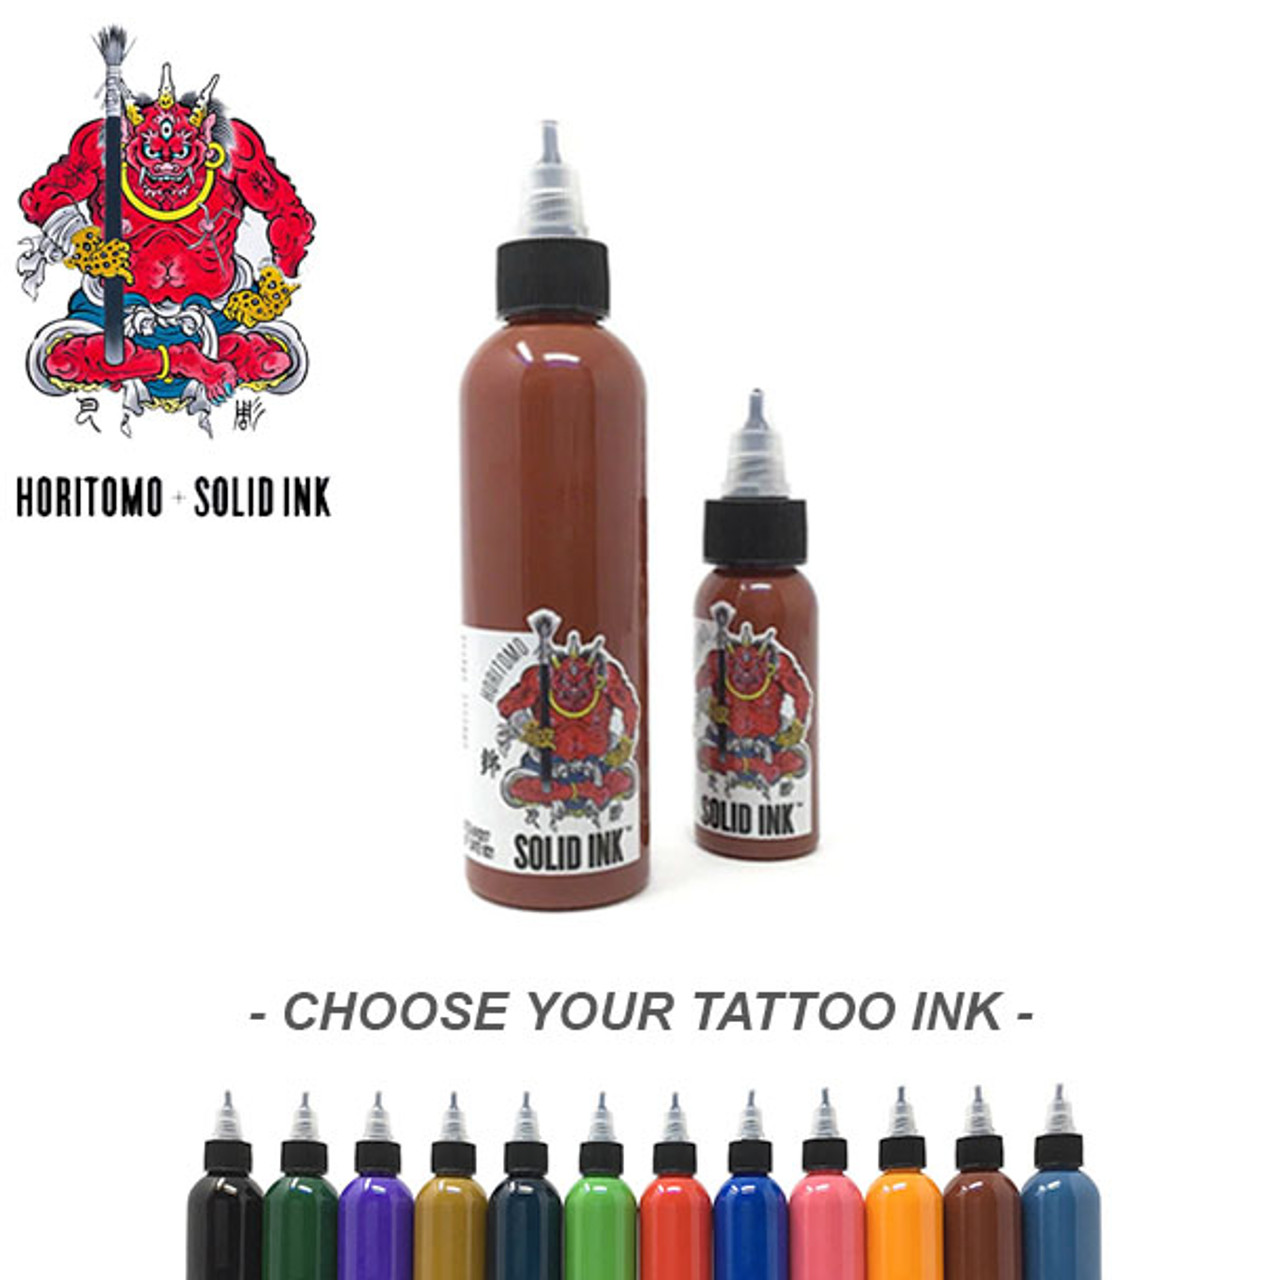 Solid Ink - Horitomo Tattoo Ink Collection